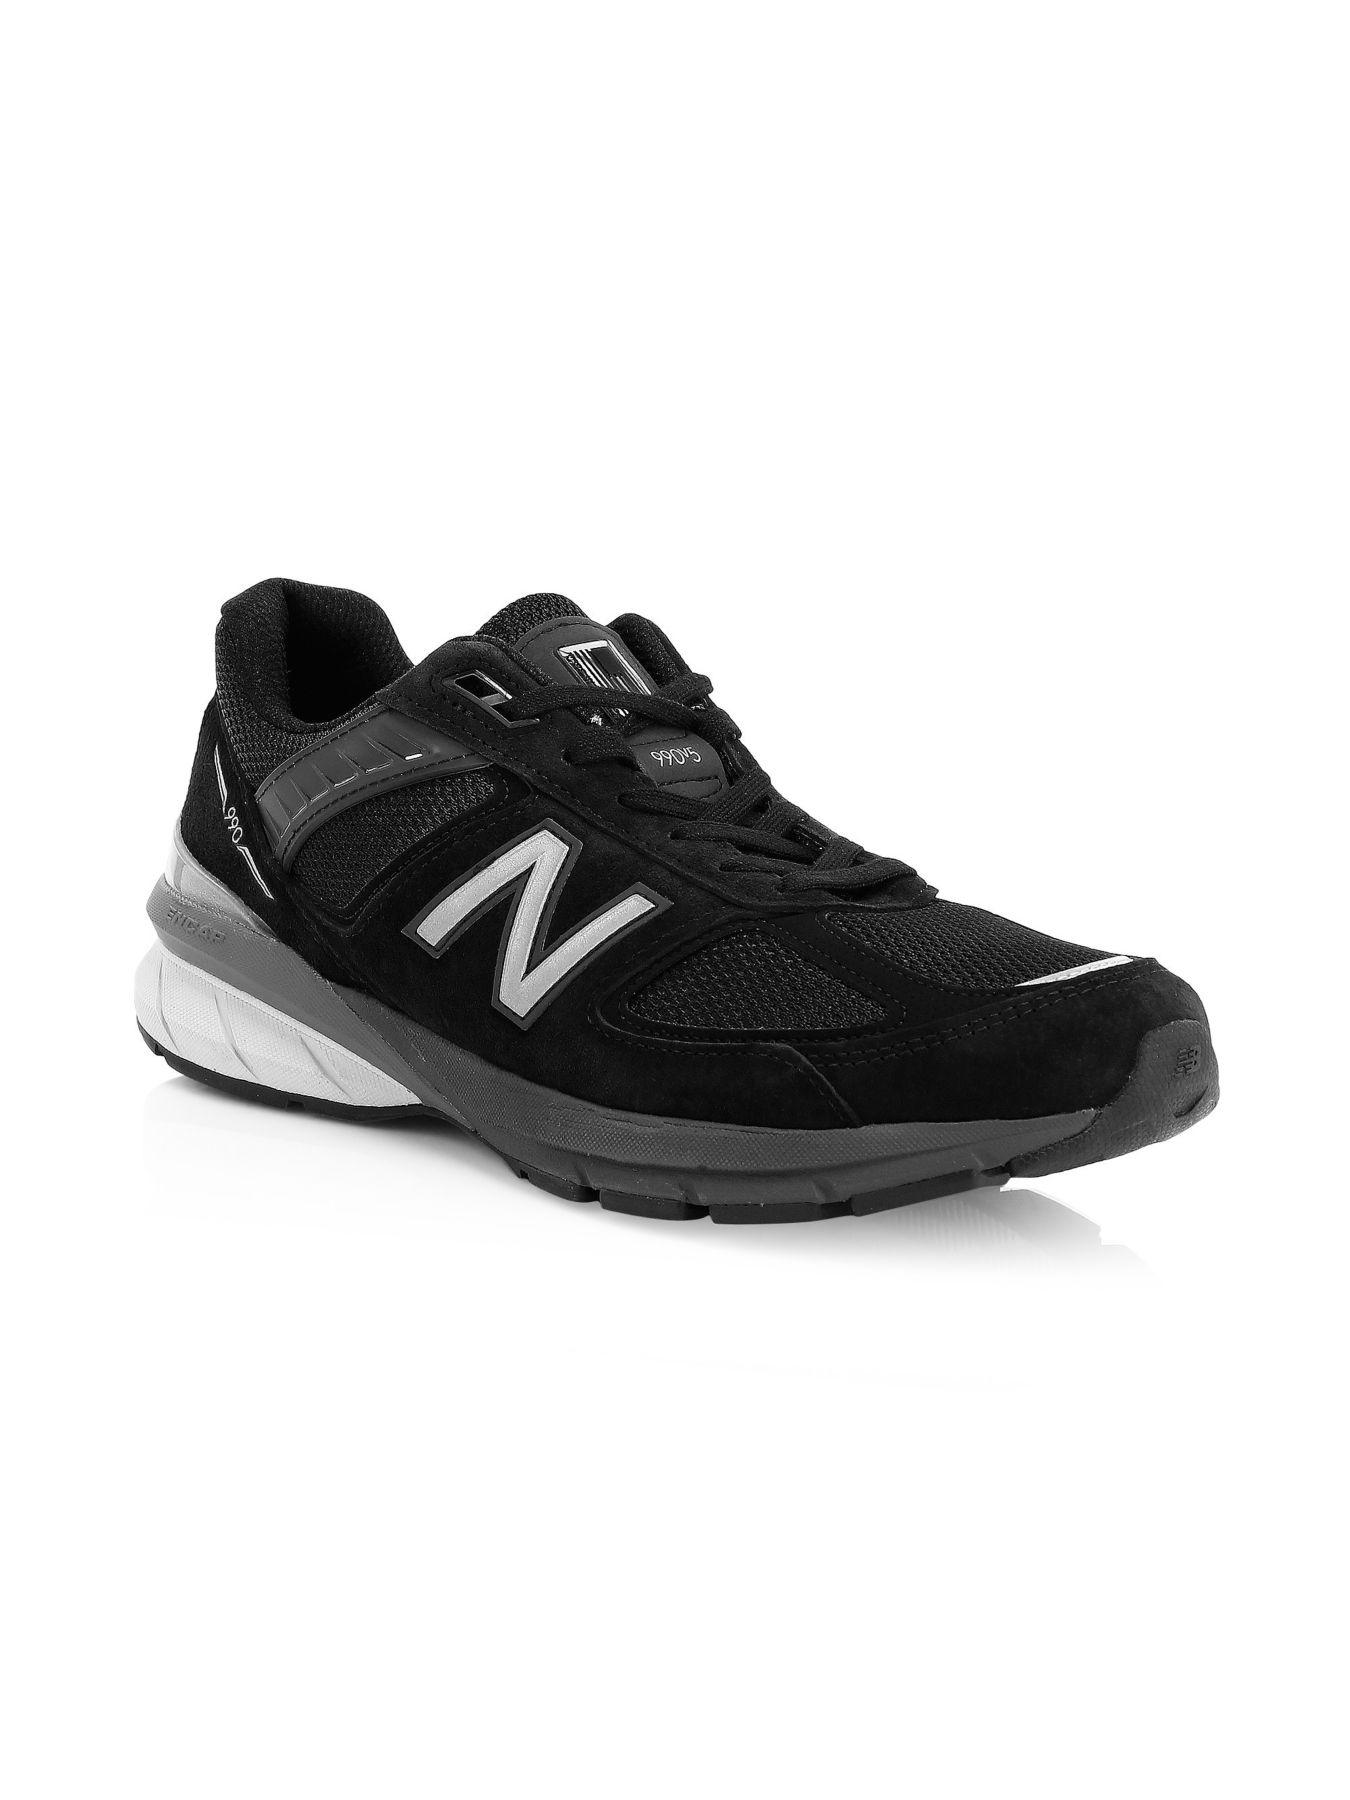 New Balance 990v5 Suede Sneakers in Black for Men - Lyst